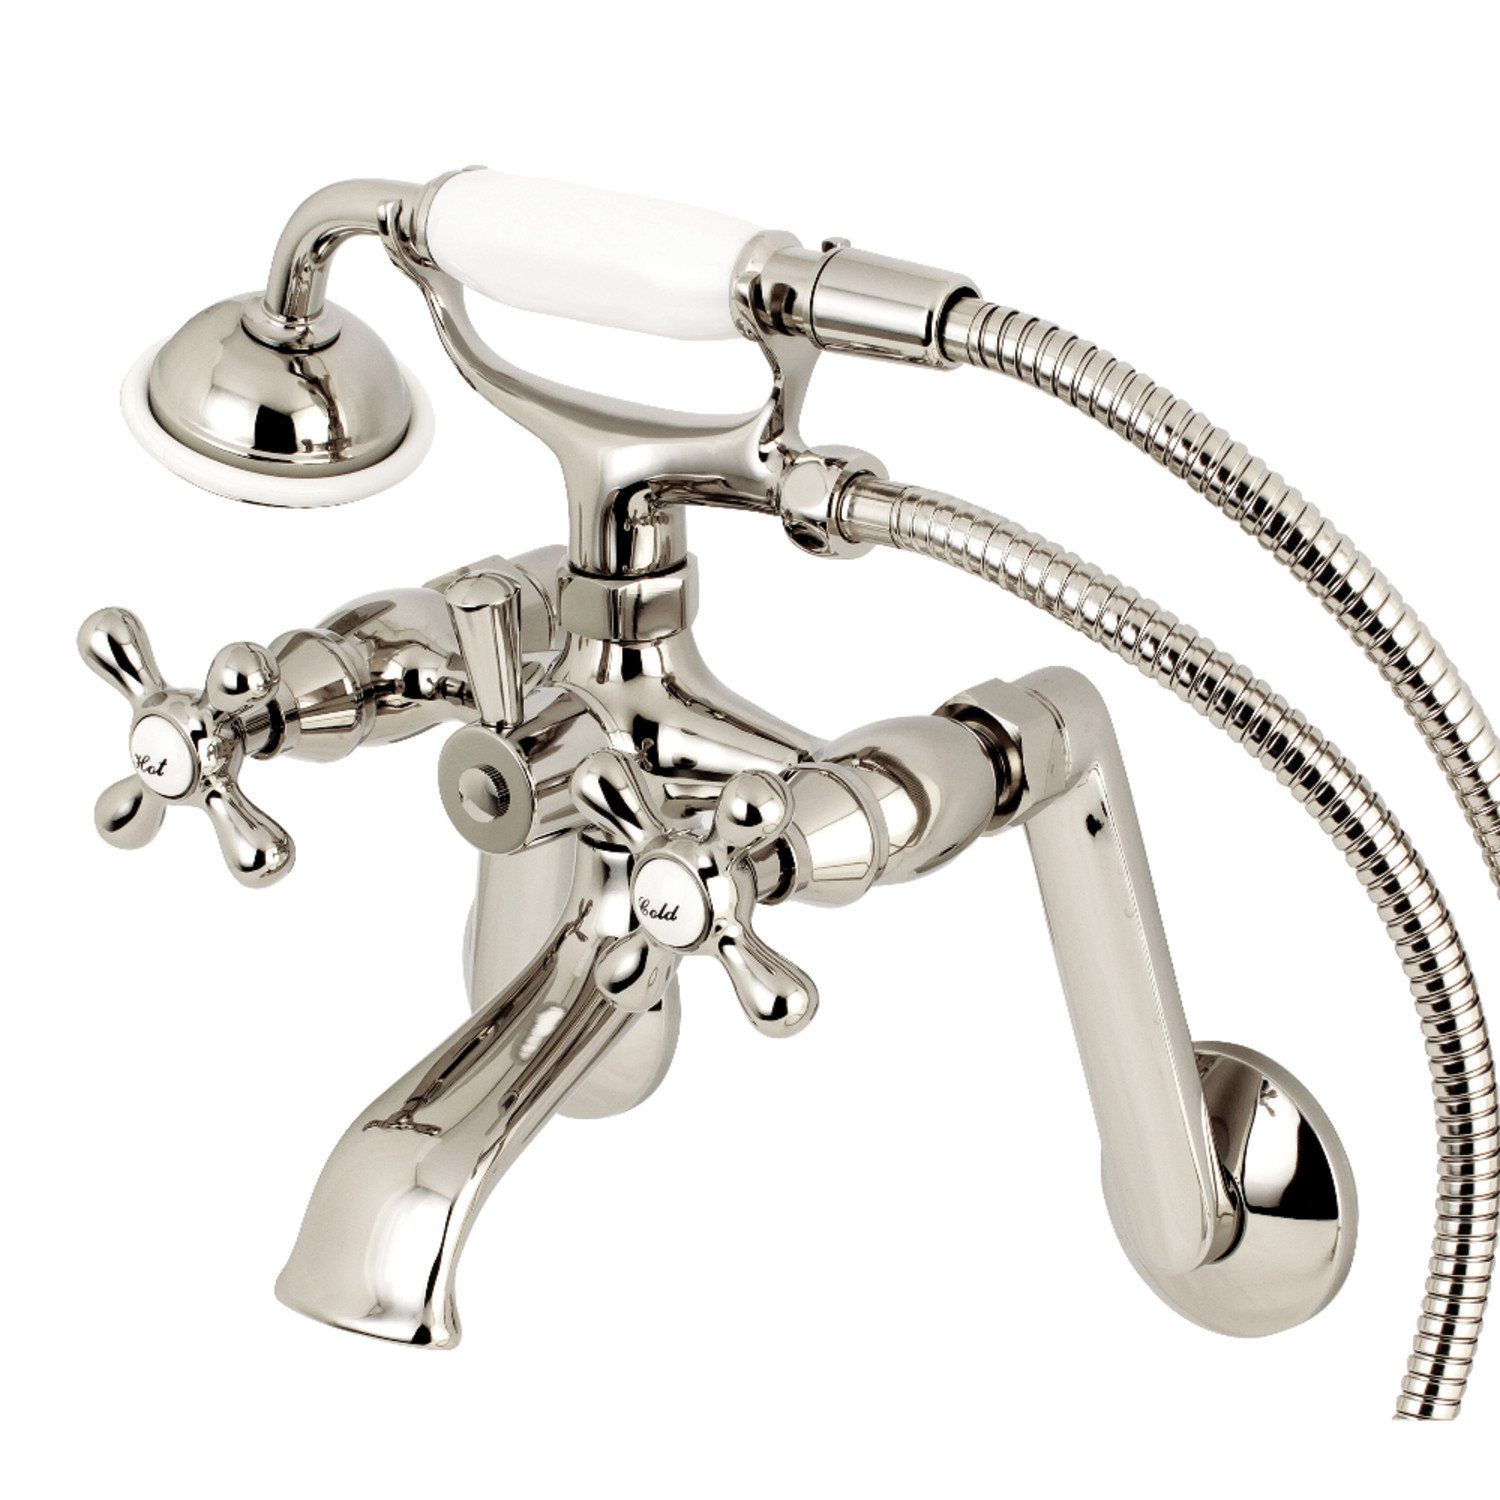 Kingston Brass Vintage Triple Handle Clawfoot Tub Faucet With Hand